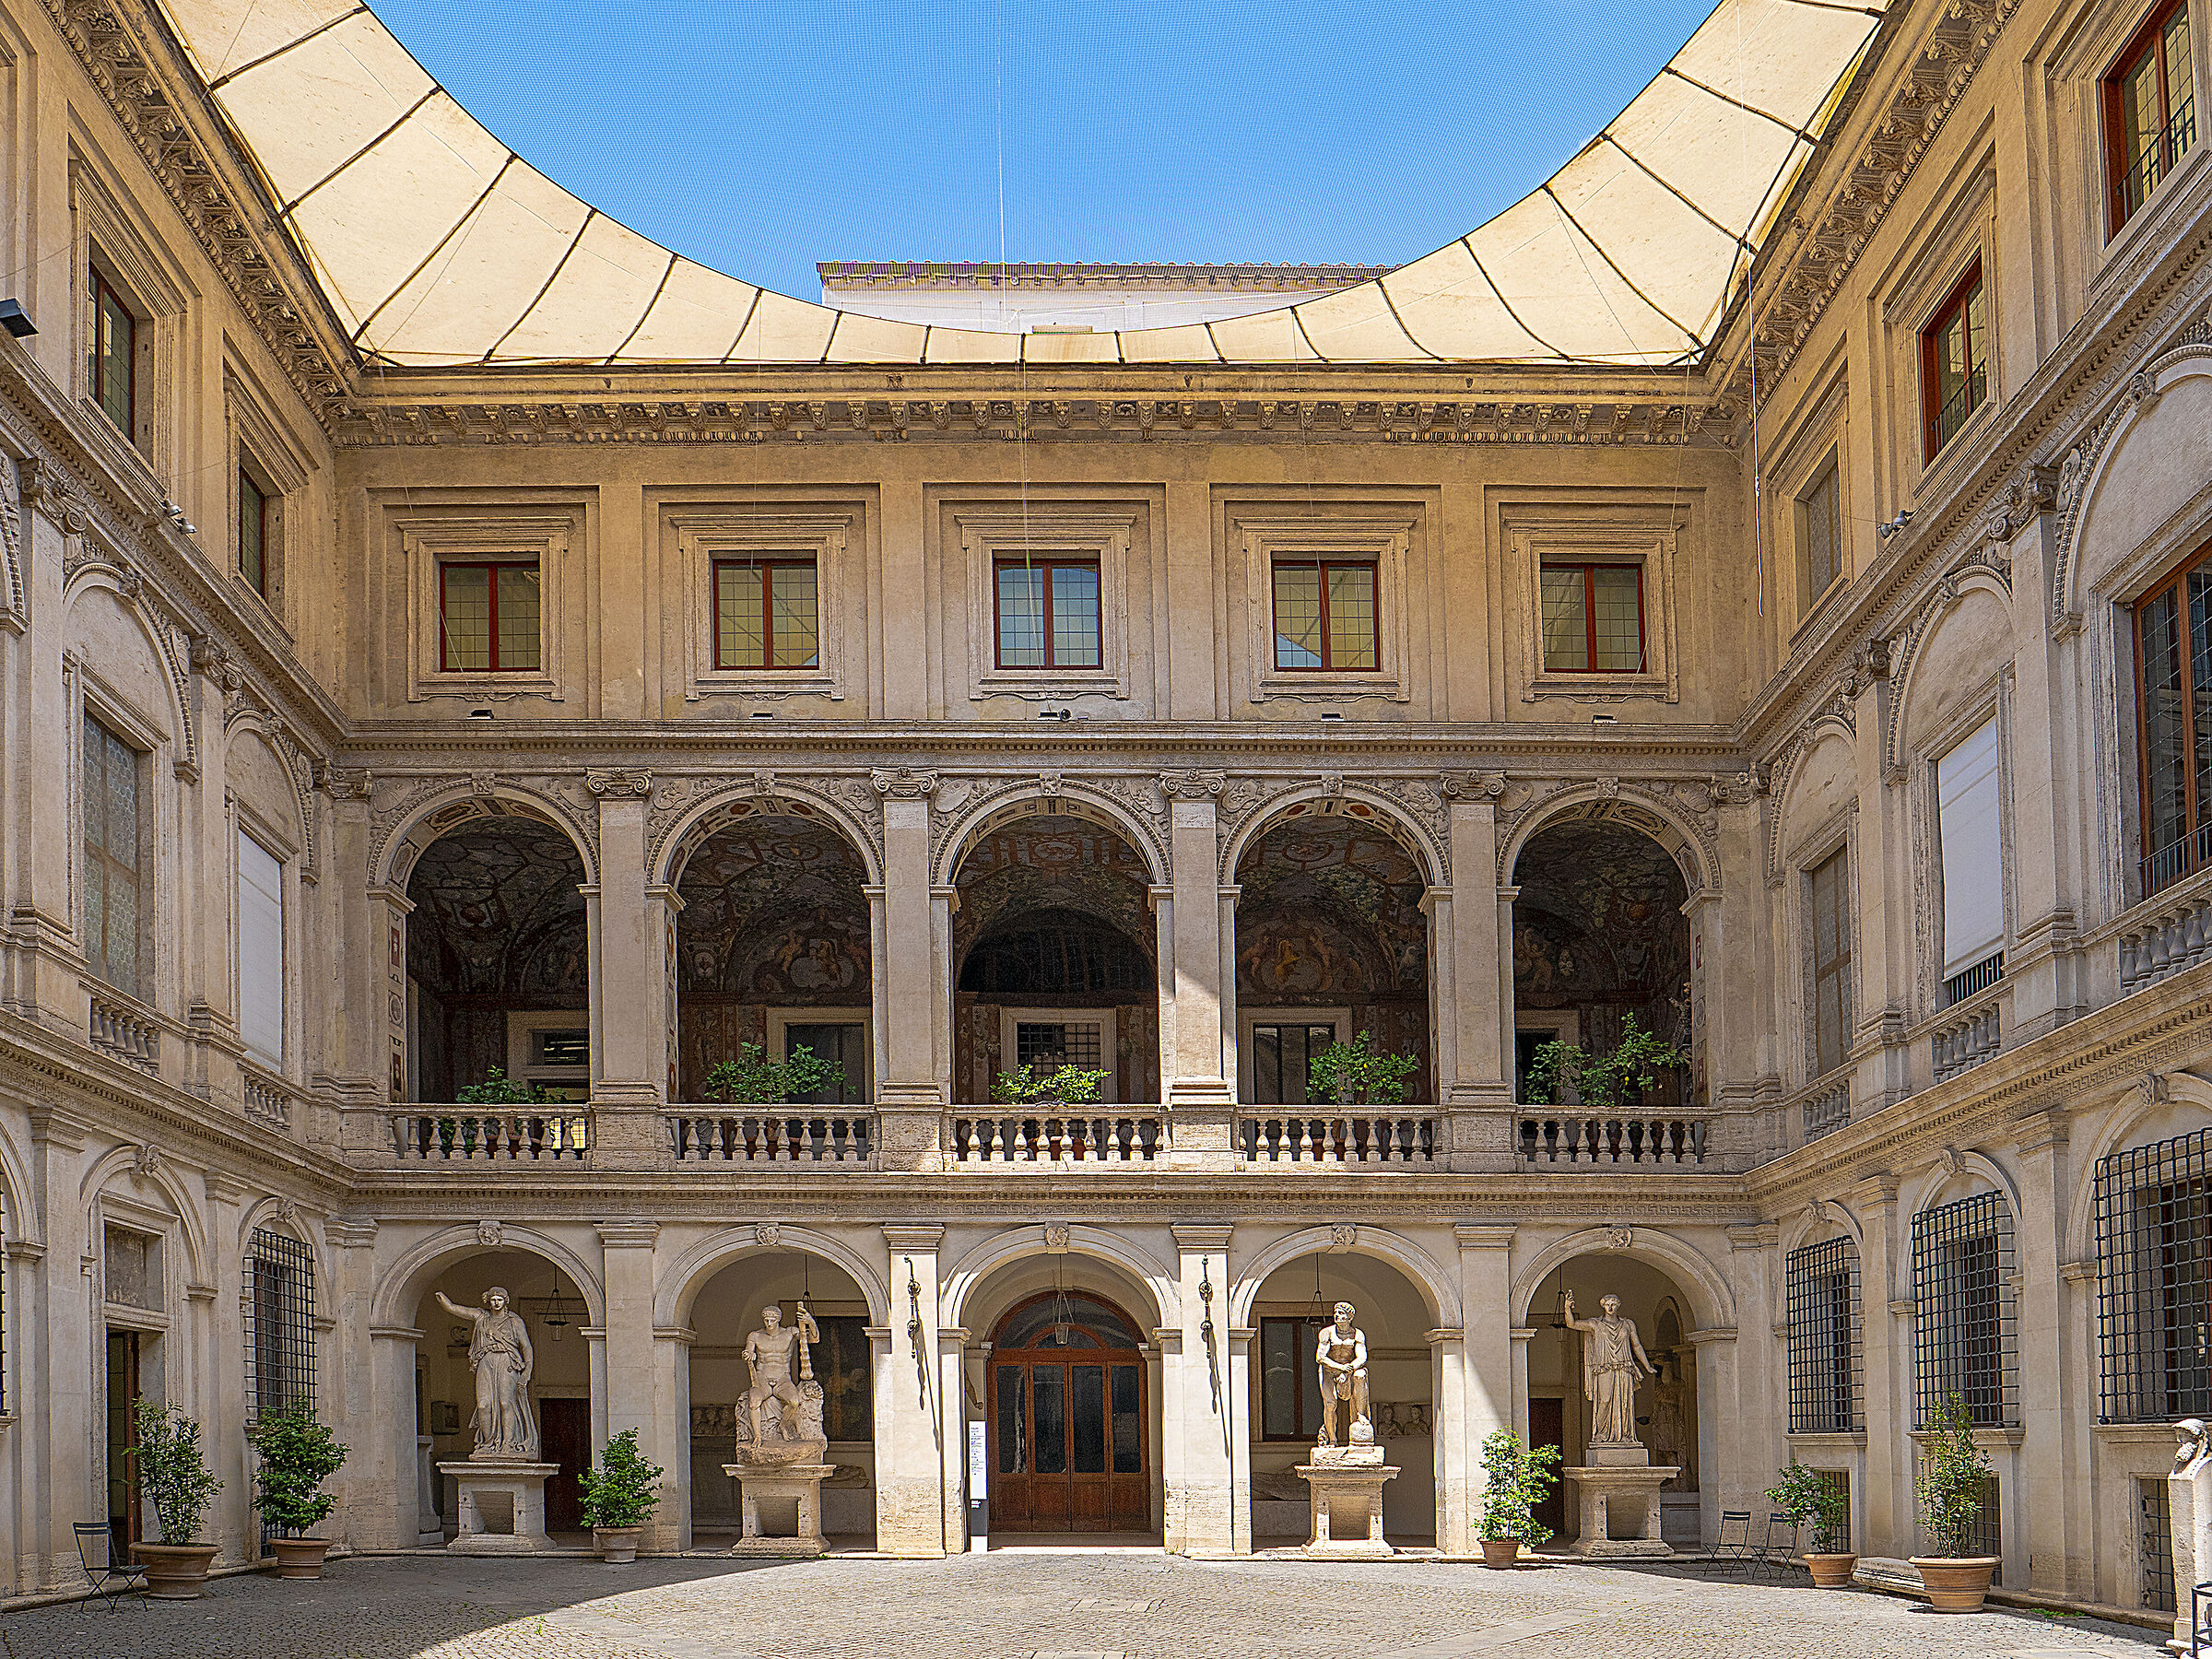 The courtyard of Palazzo Altemps...